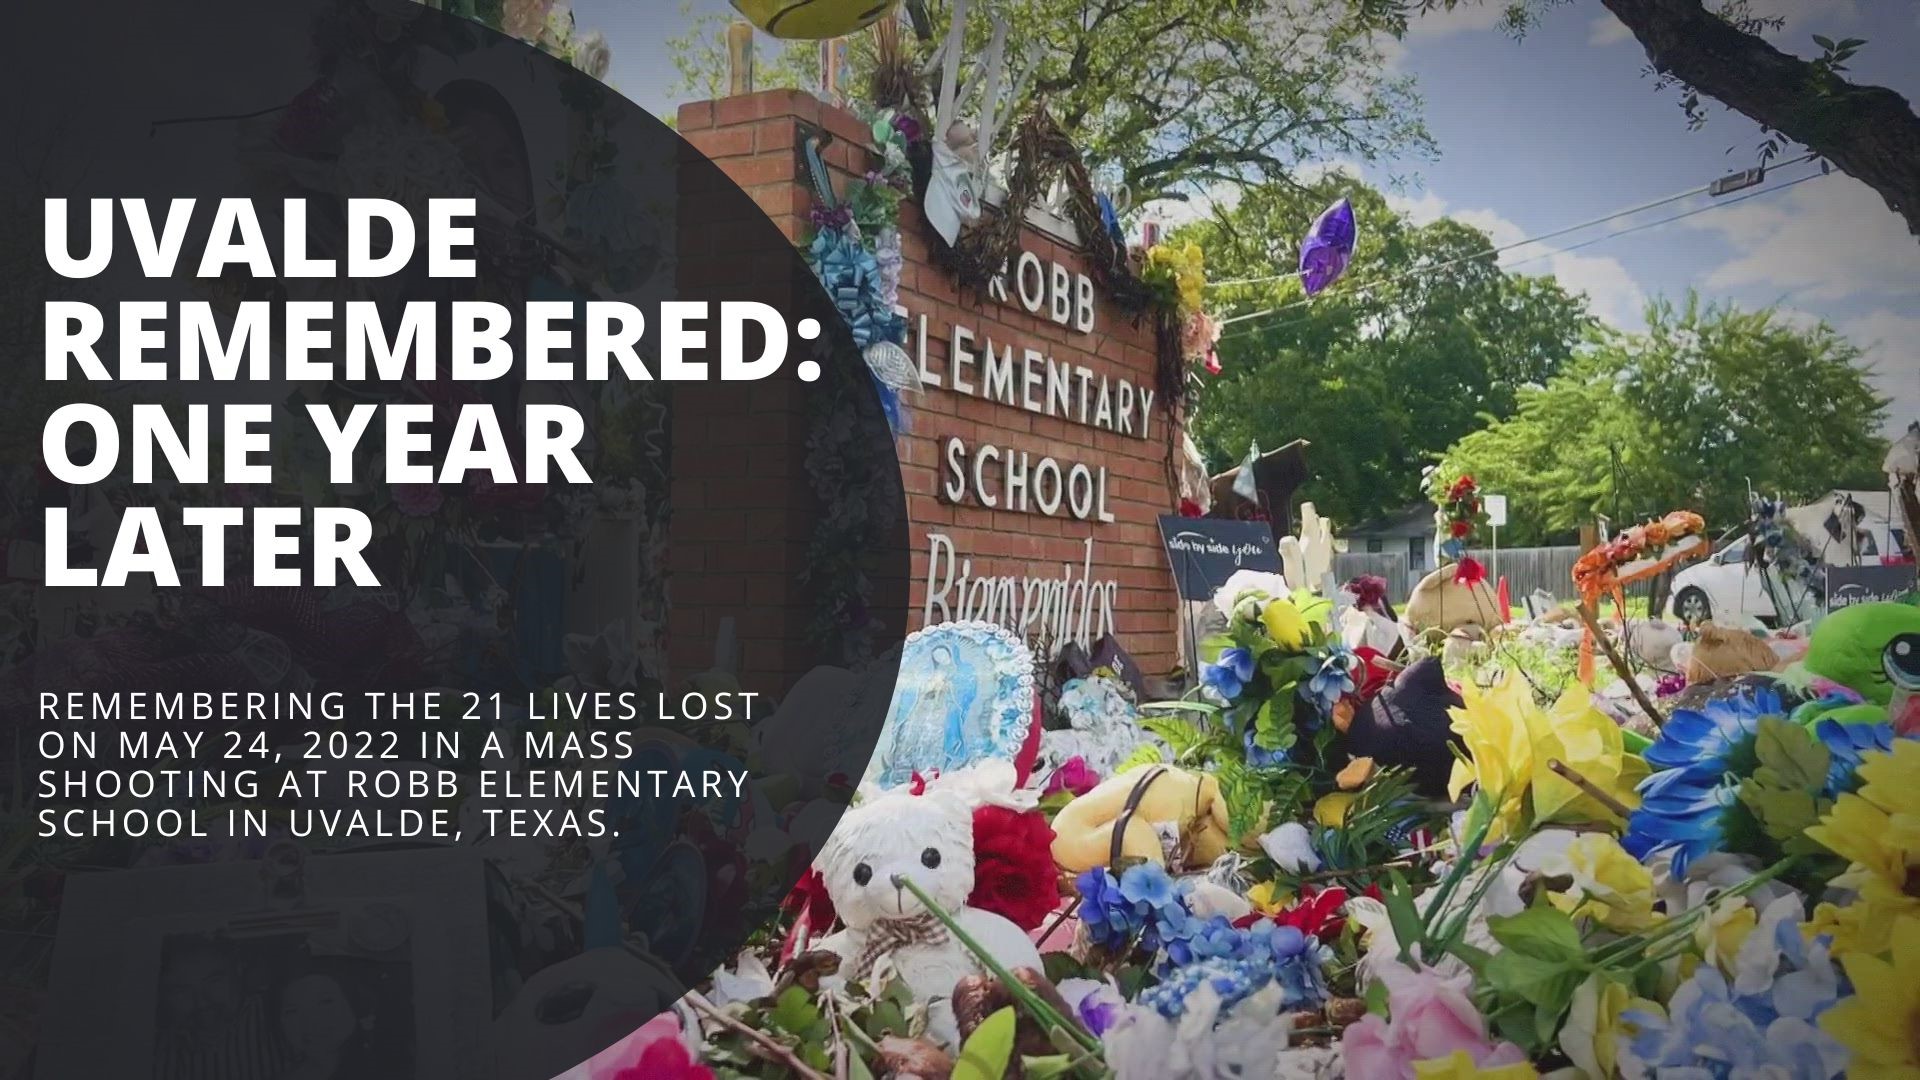 Remembering the 21 lives lost on May 24, 2022 in a mass shooting at Robb Elementary School in Uvalde, Texas.